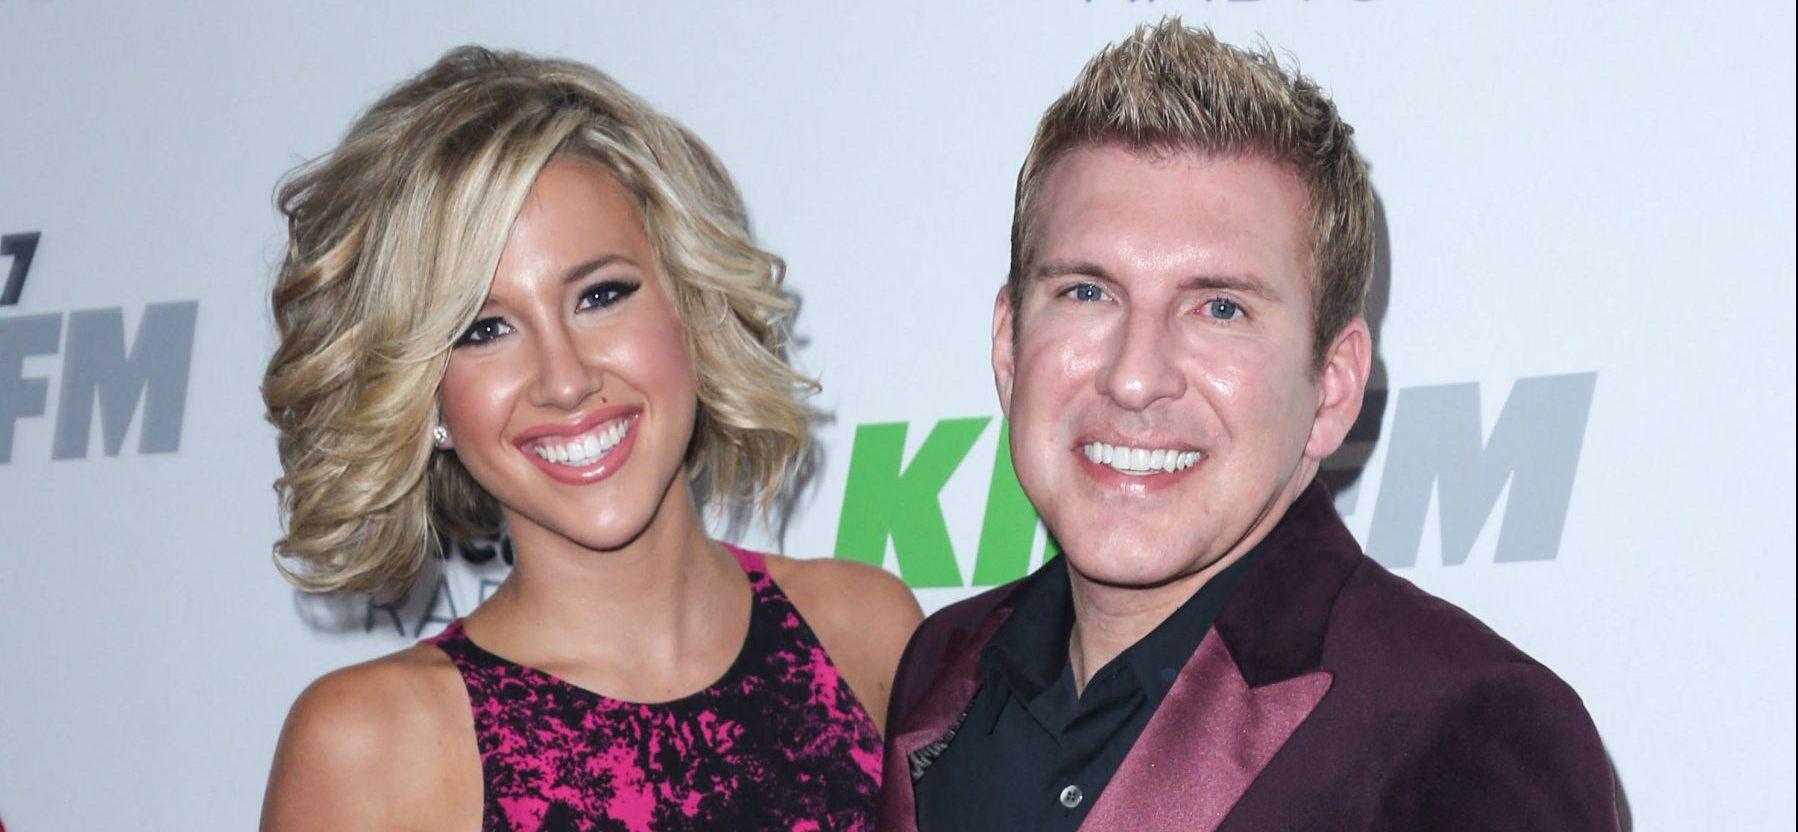 Todd Chrisley’s Hair Has Gone ‘Gray’ In Prison Where He’s Allegedly Living In ‘Inhumane’ Conditions